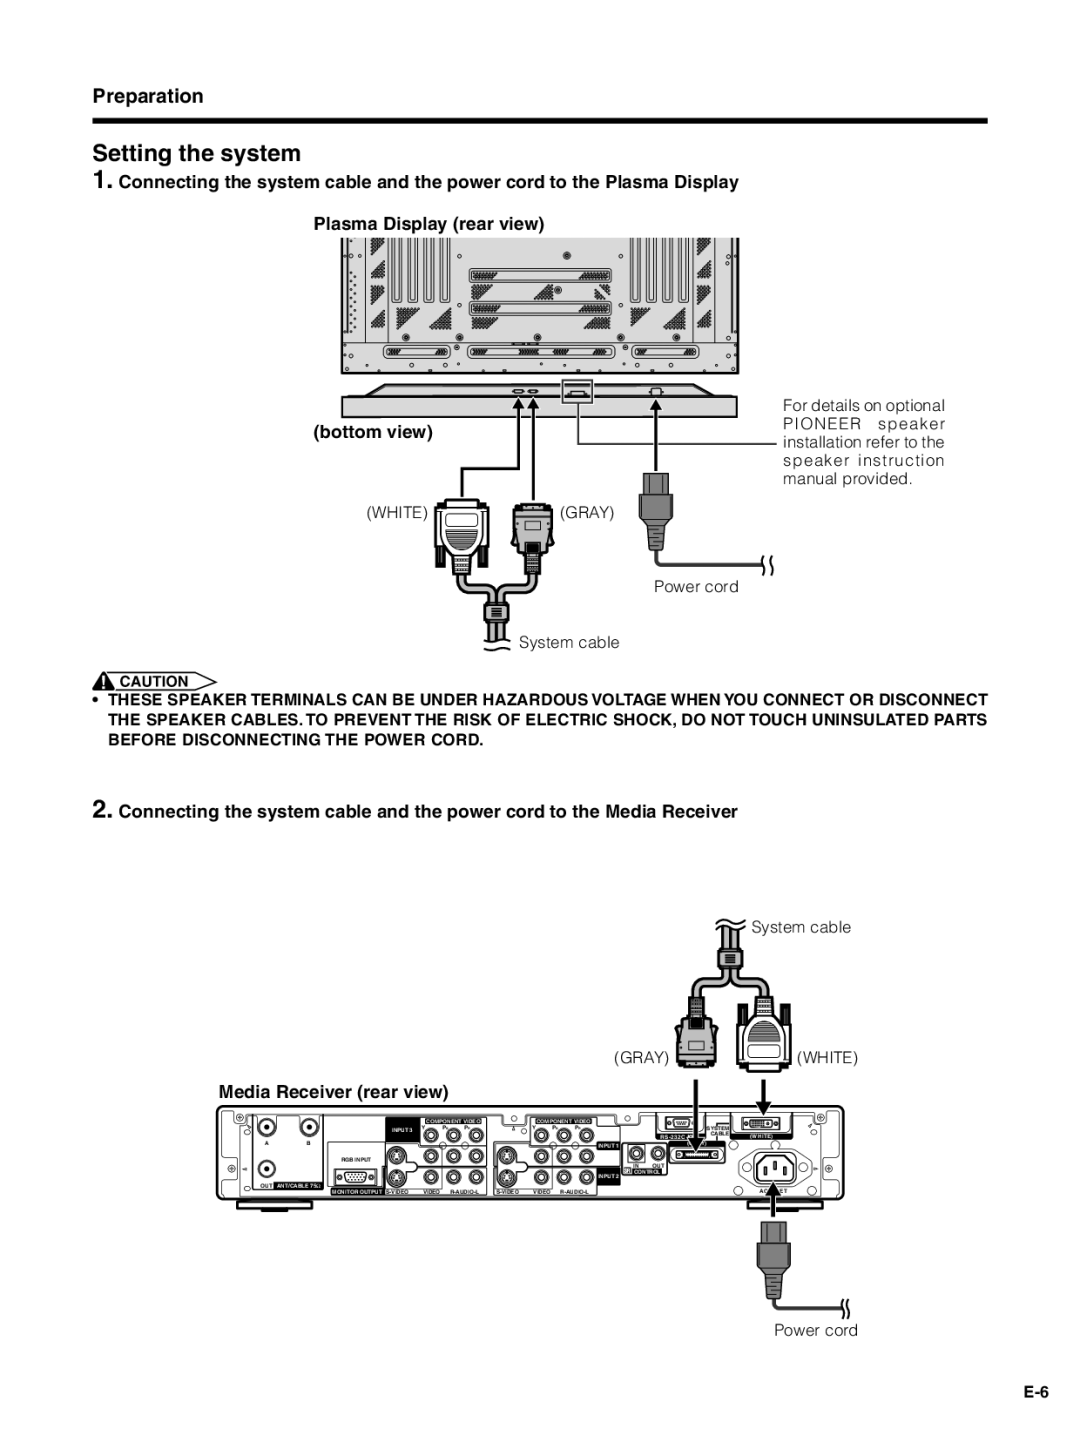 Pioneer PDP-4330HD, PDP-5030HD manual Setting the system, Preparation, Media Receiver rear view 